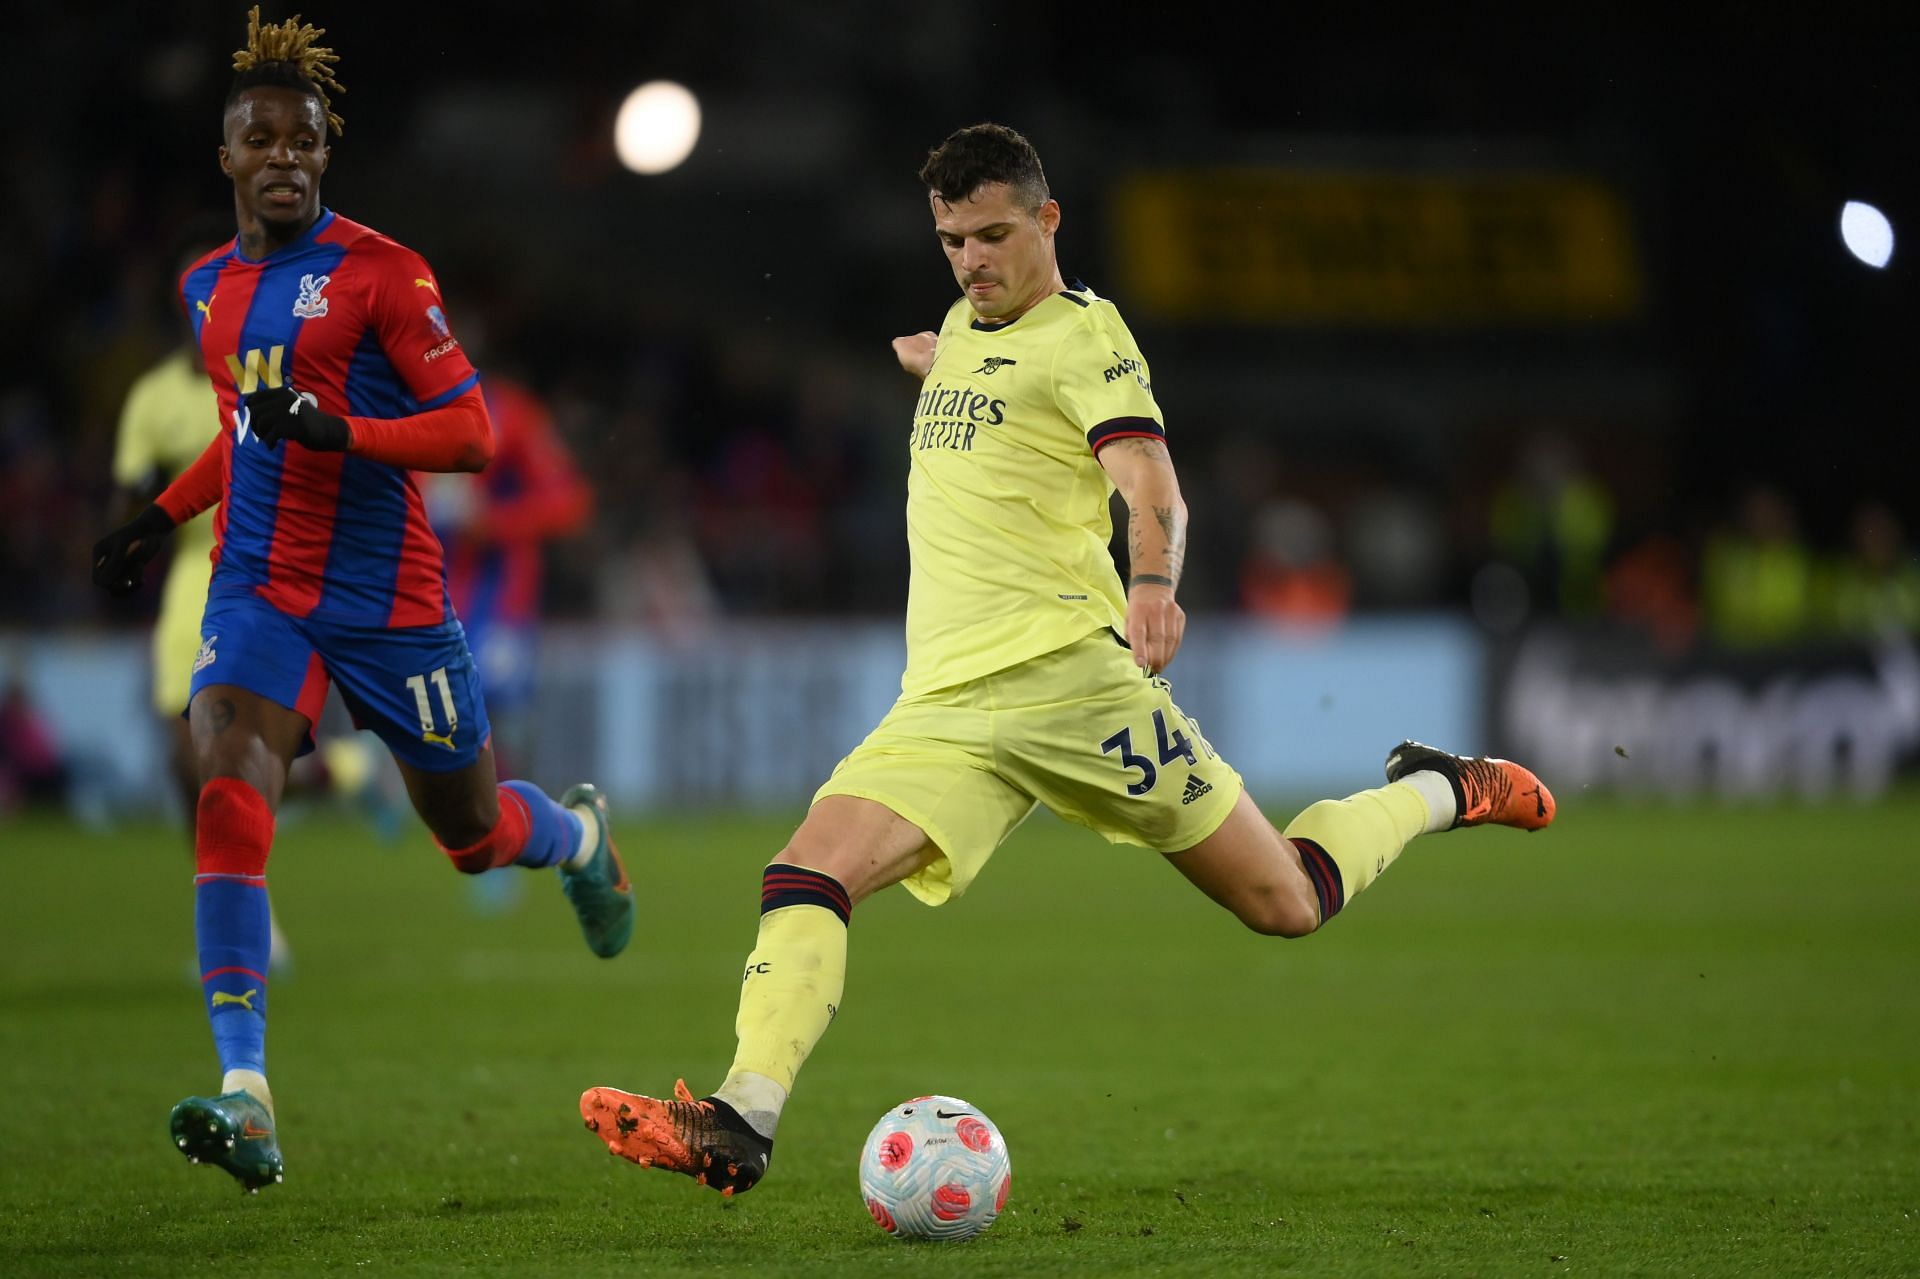 Granit Xhaka in action against Crystal Palace.